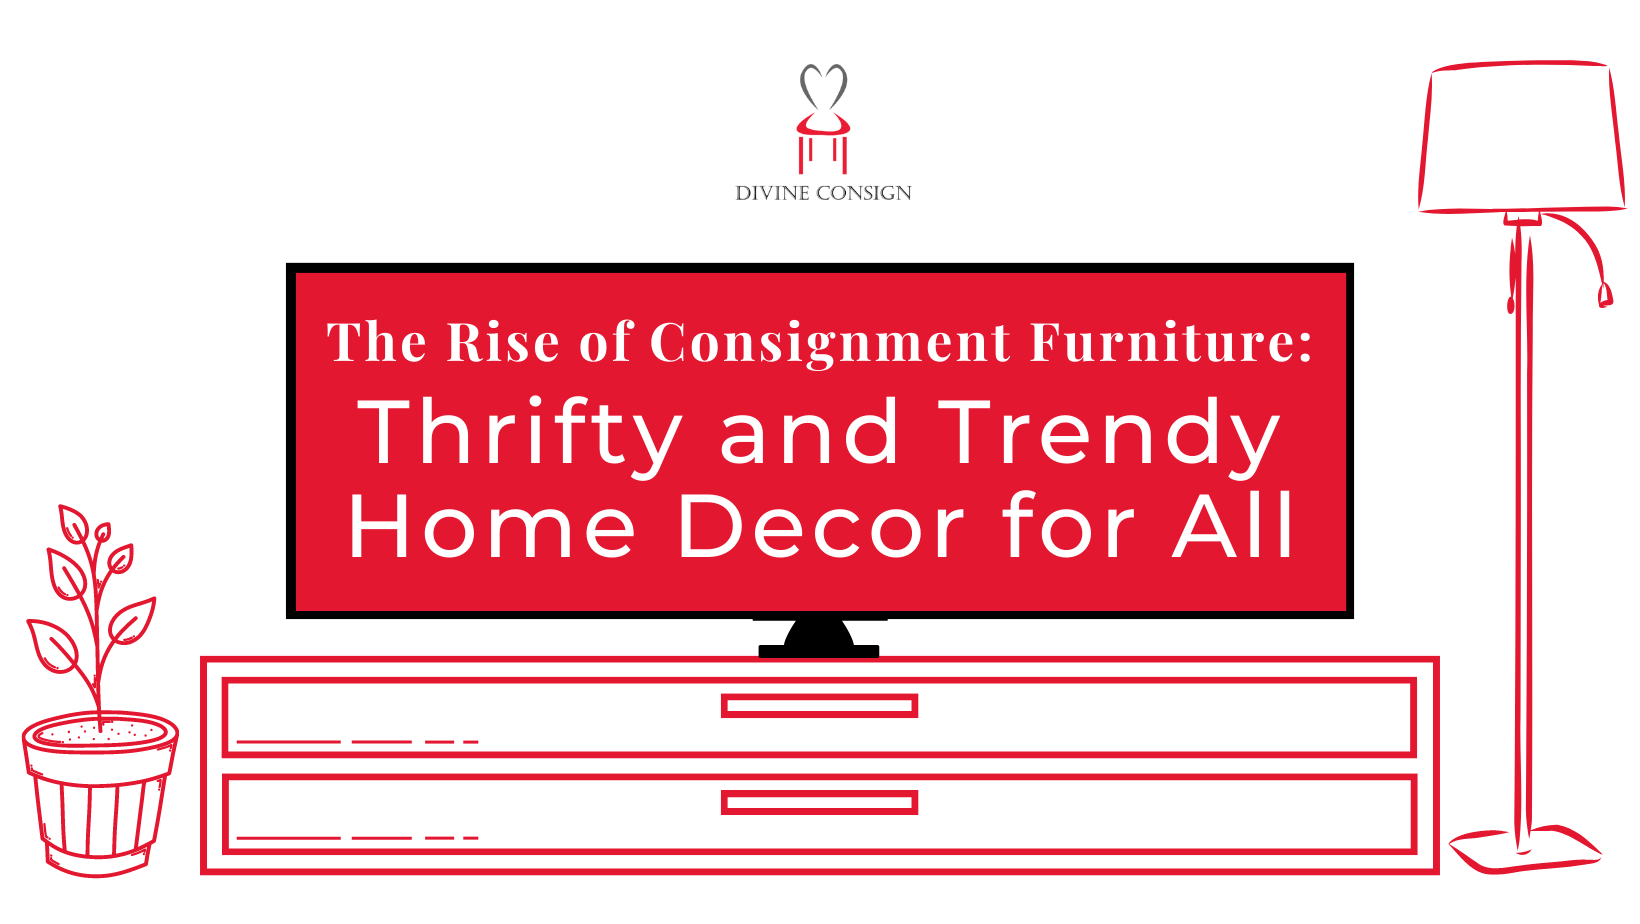 The Rise of Consignment Furniture: Thrifty and Trendy Home Decor for All